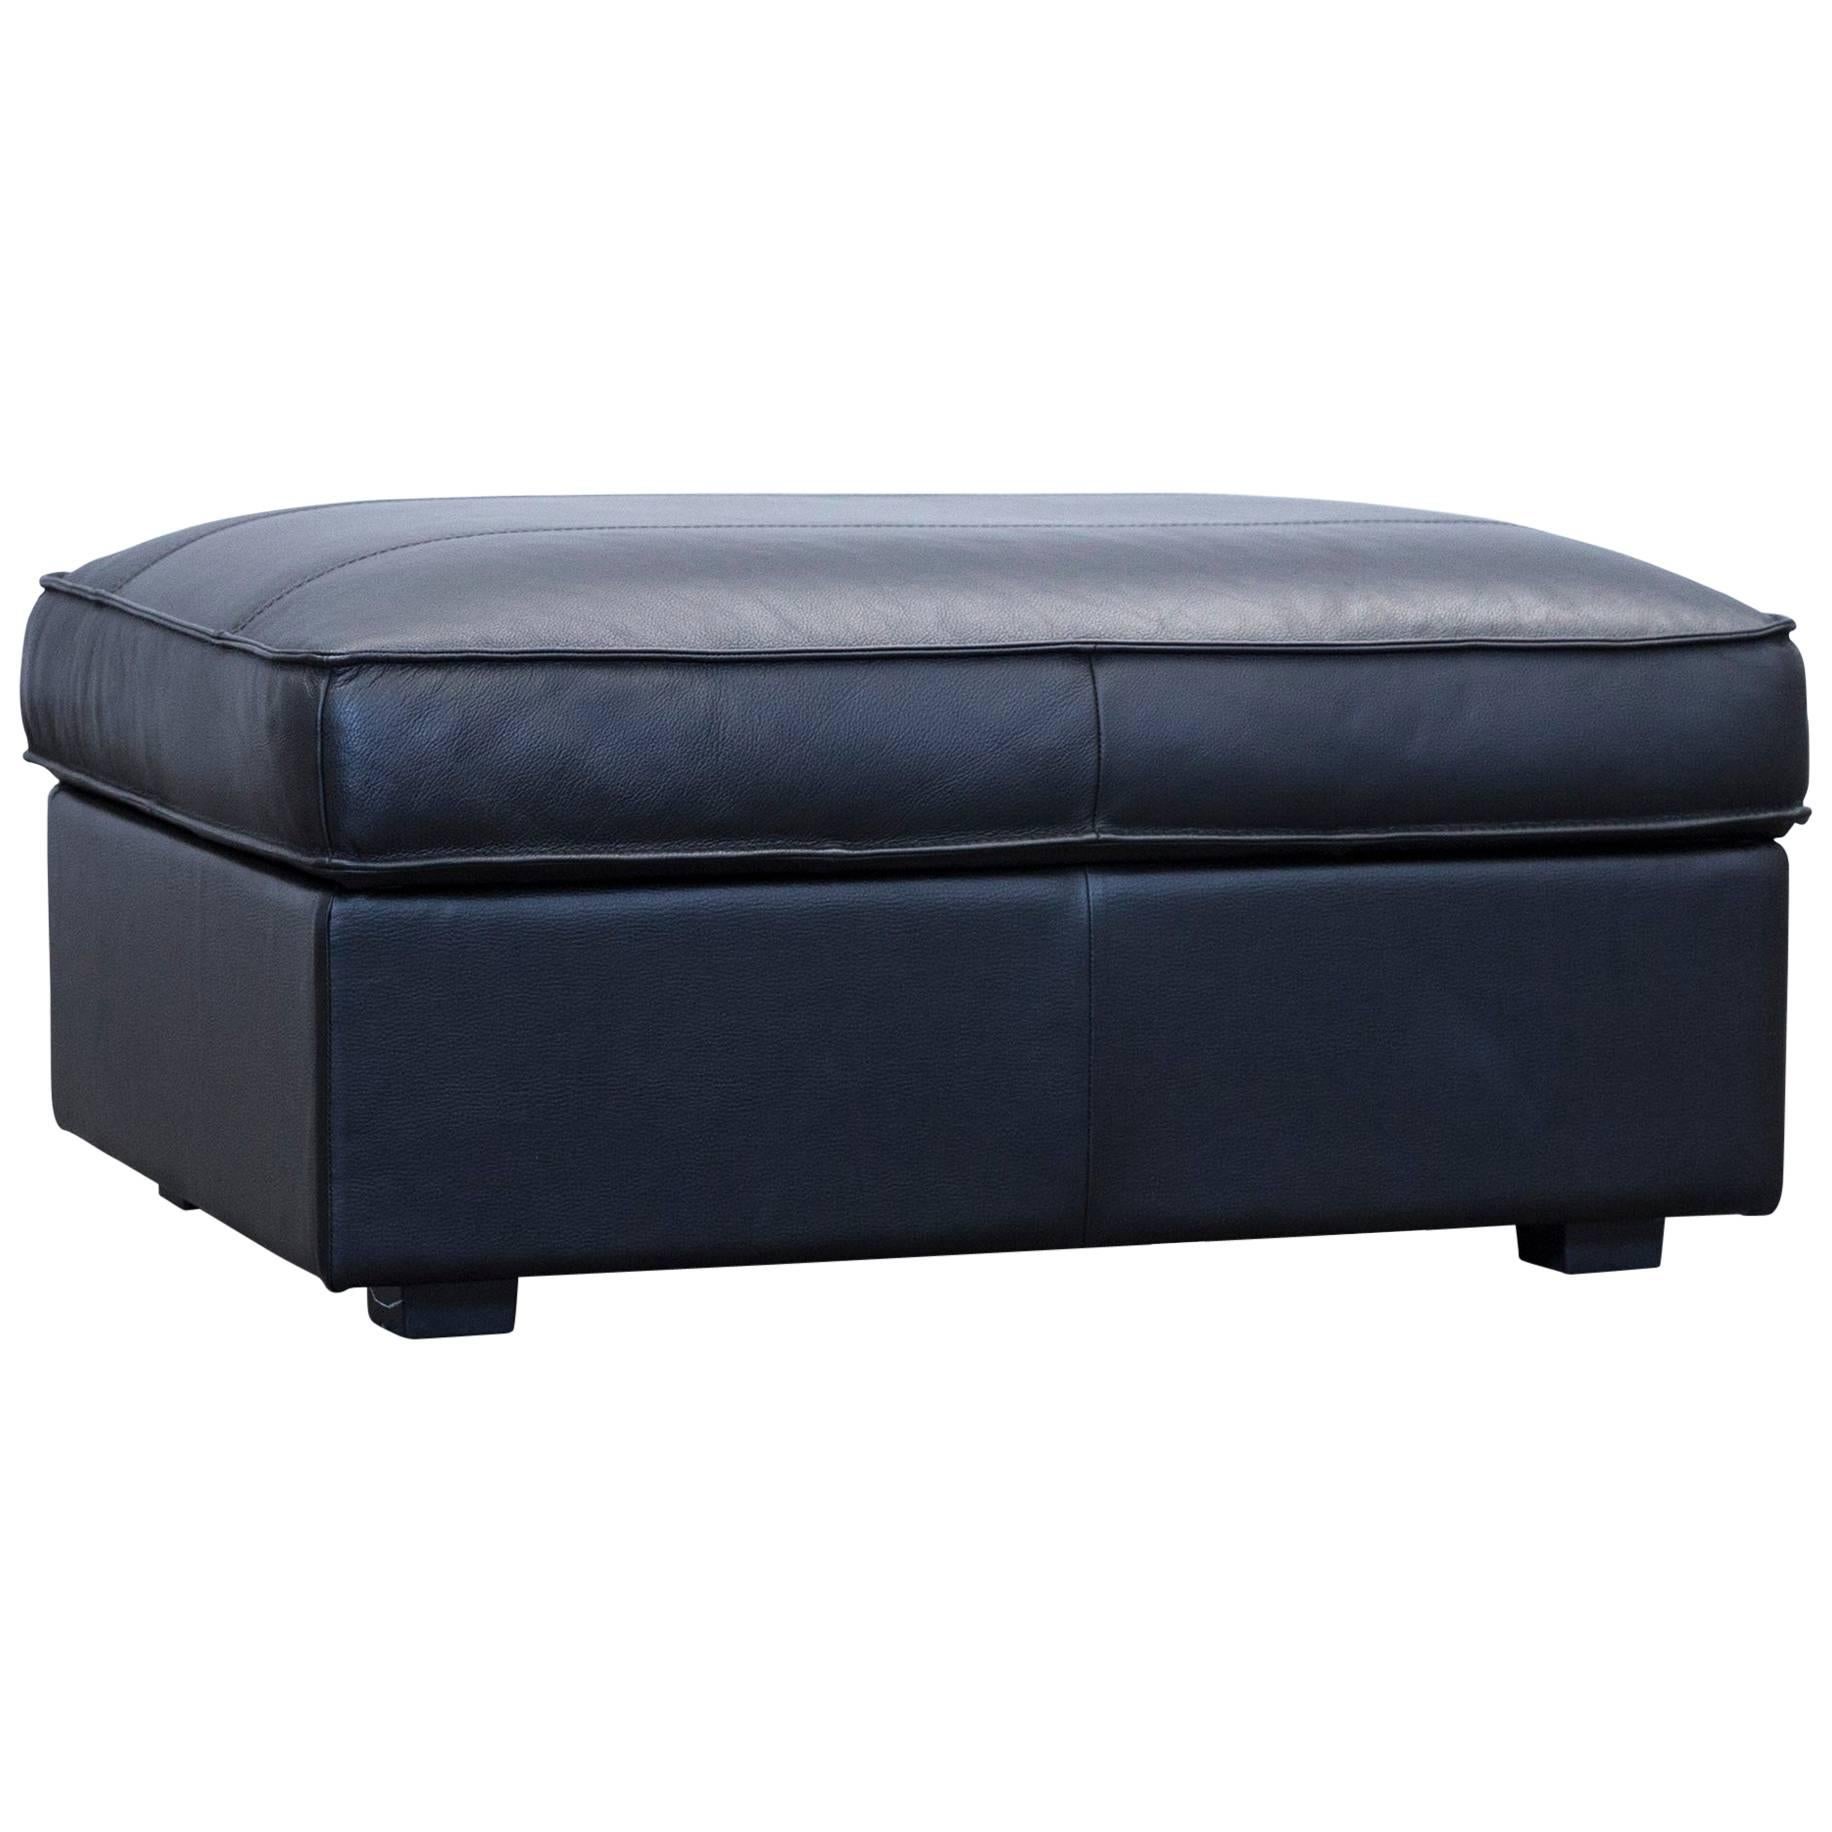 Designer Footstool Leather Black Function Couch Modern Box Storage